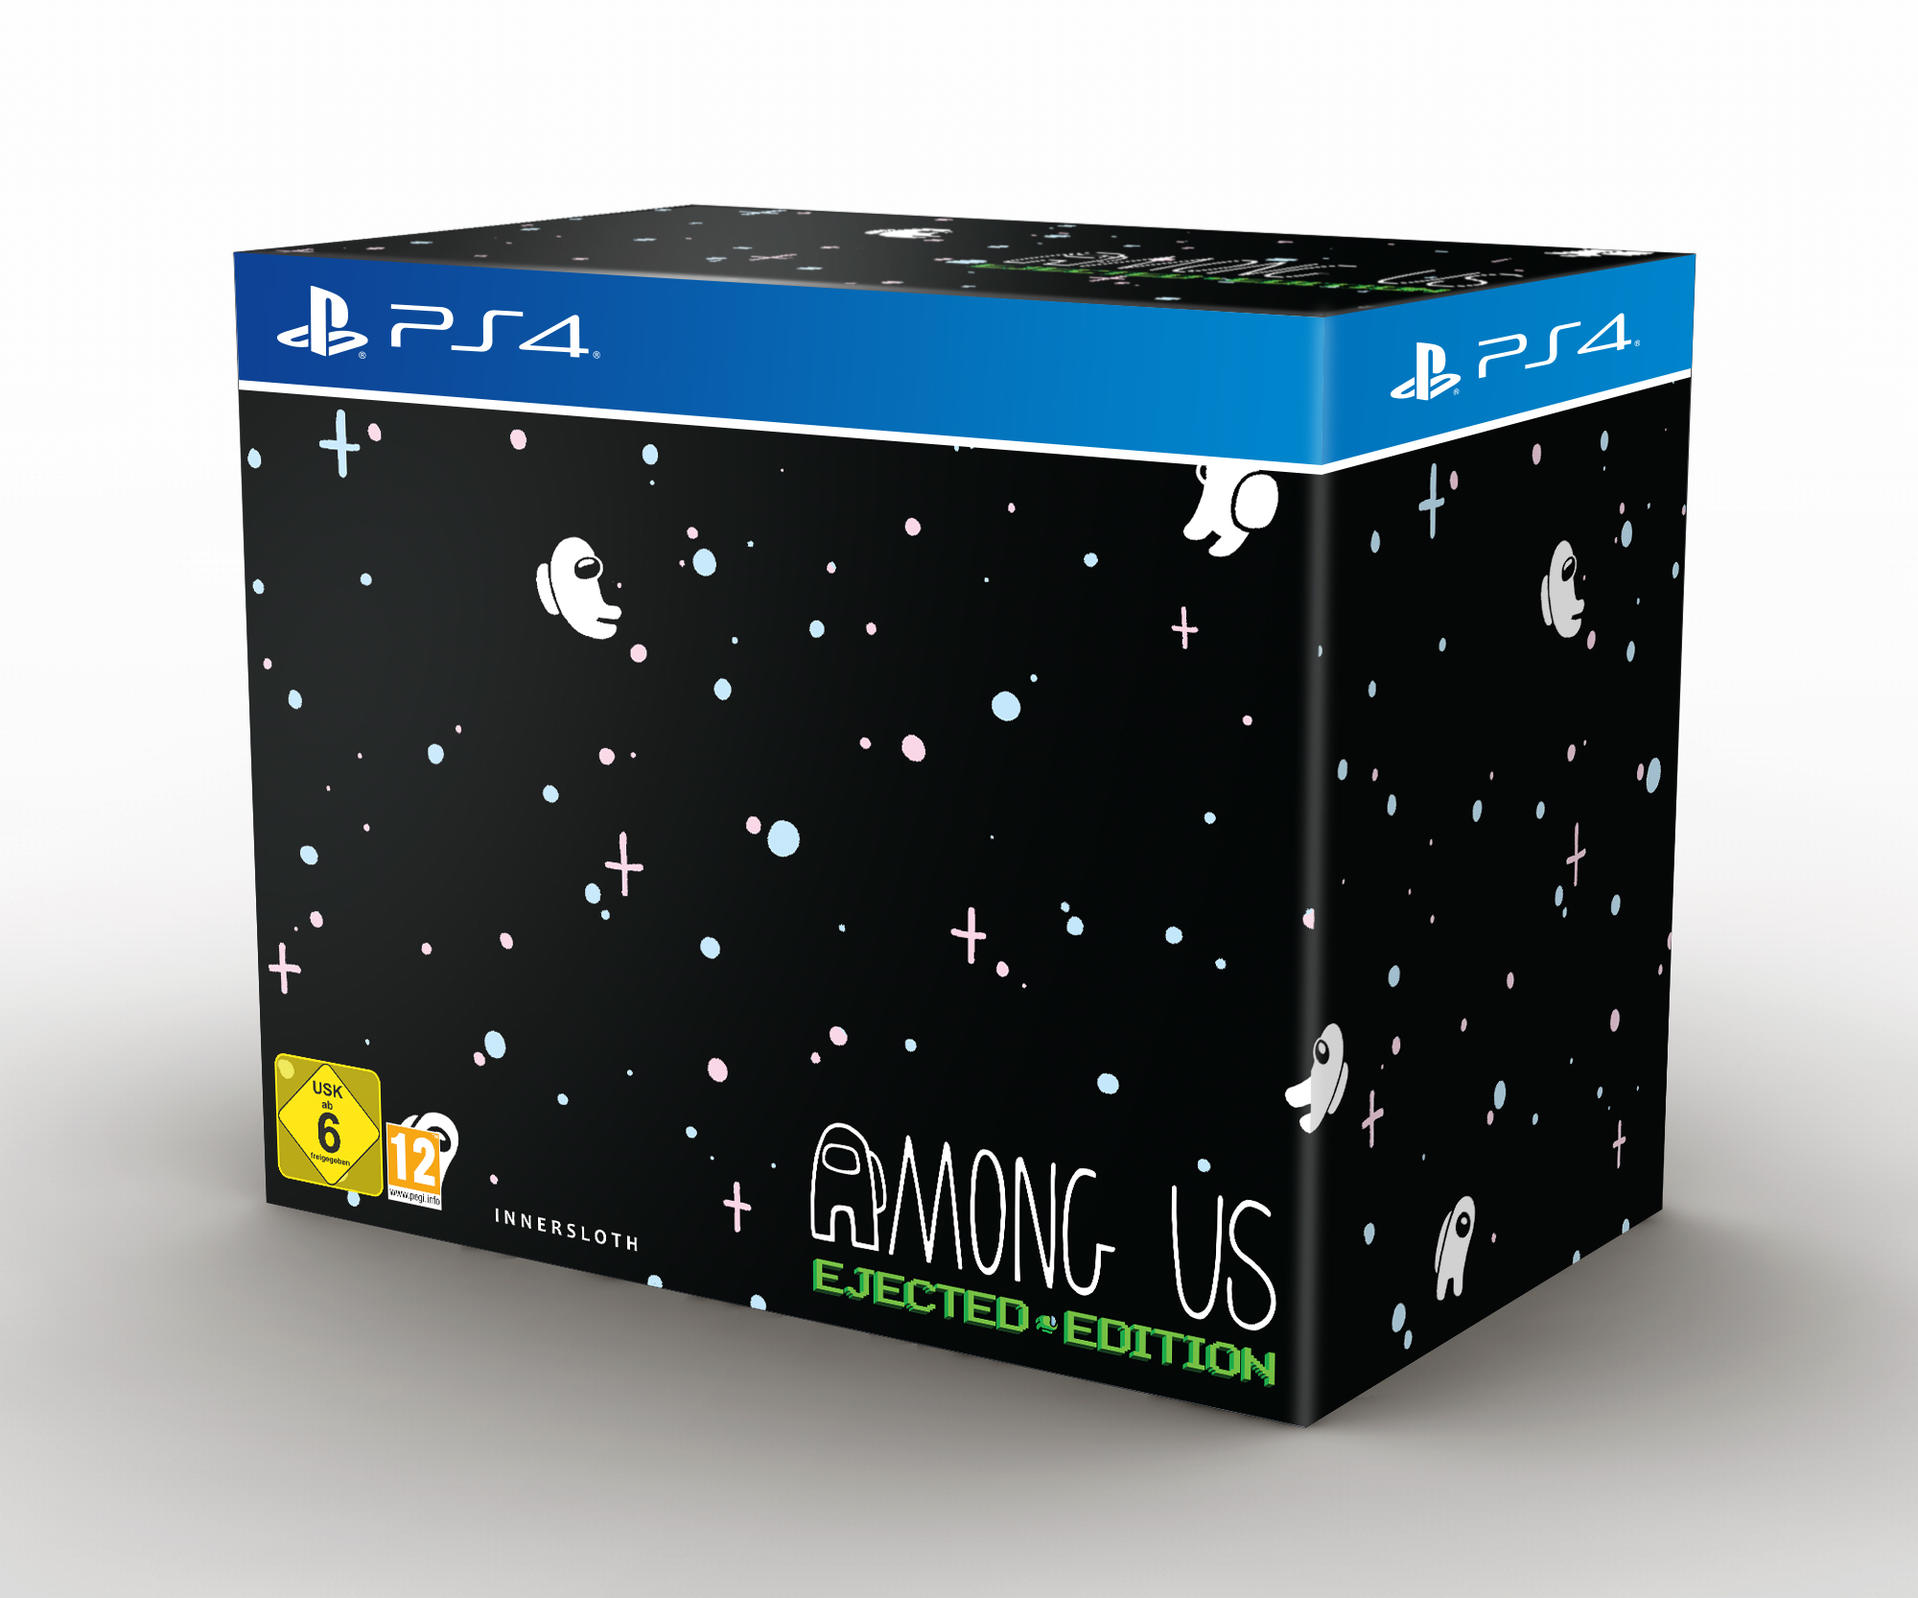 Us: Among Ejected 4] - [PlayStation Edition